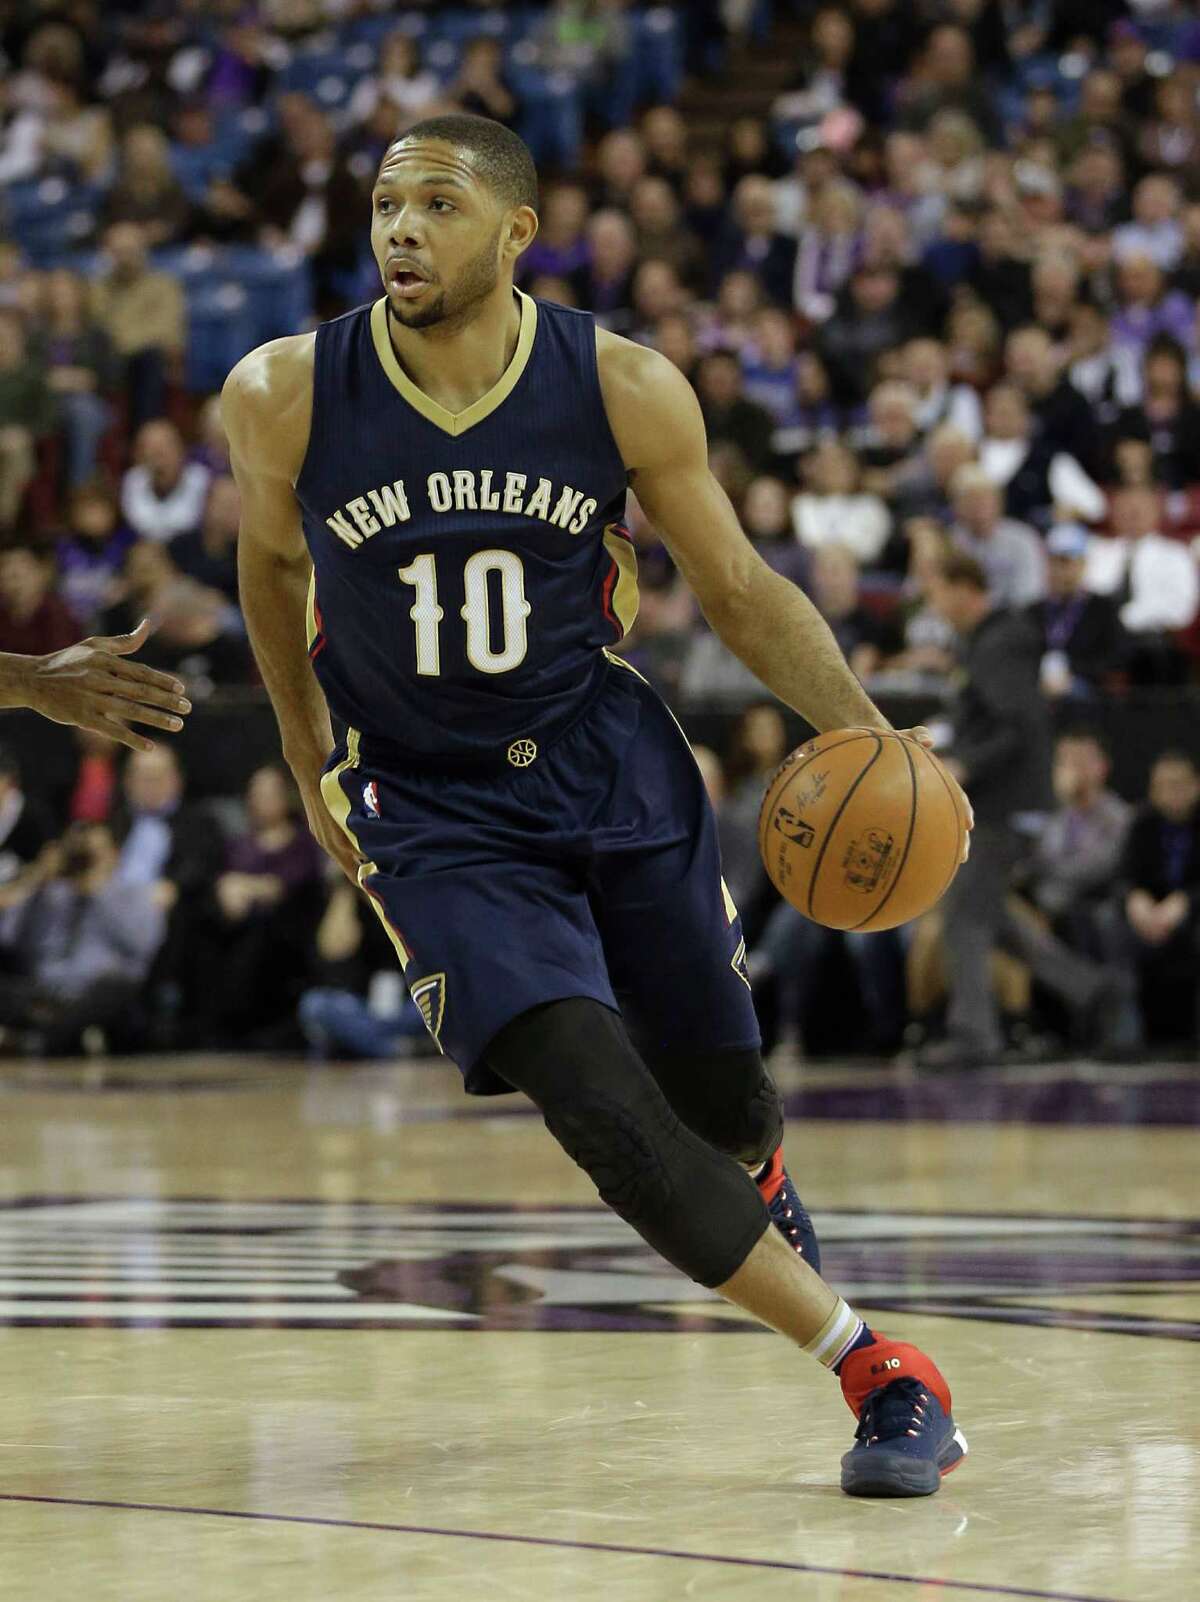 New Orleans Pelicans guard Eric Gordon drives against the Sacramento Kings during the first quarter of an NBA basketball game, Wednesday, Jan. 13, 2016, in Sacramento, Calif. The Pelicans won 109-97.(AP Photo/Rich Pedroncelli)